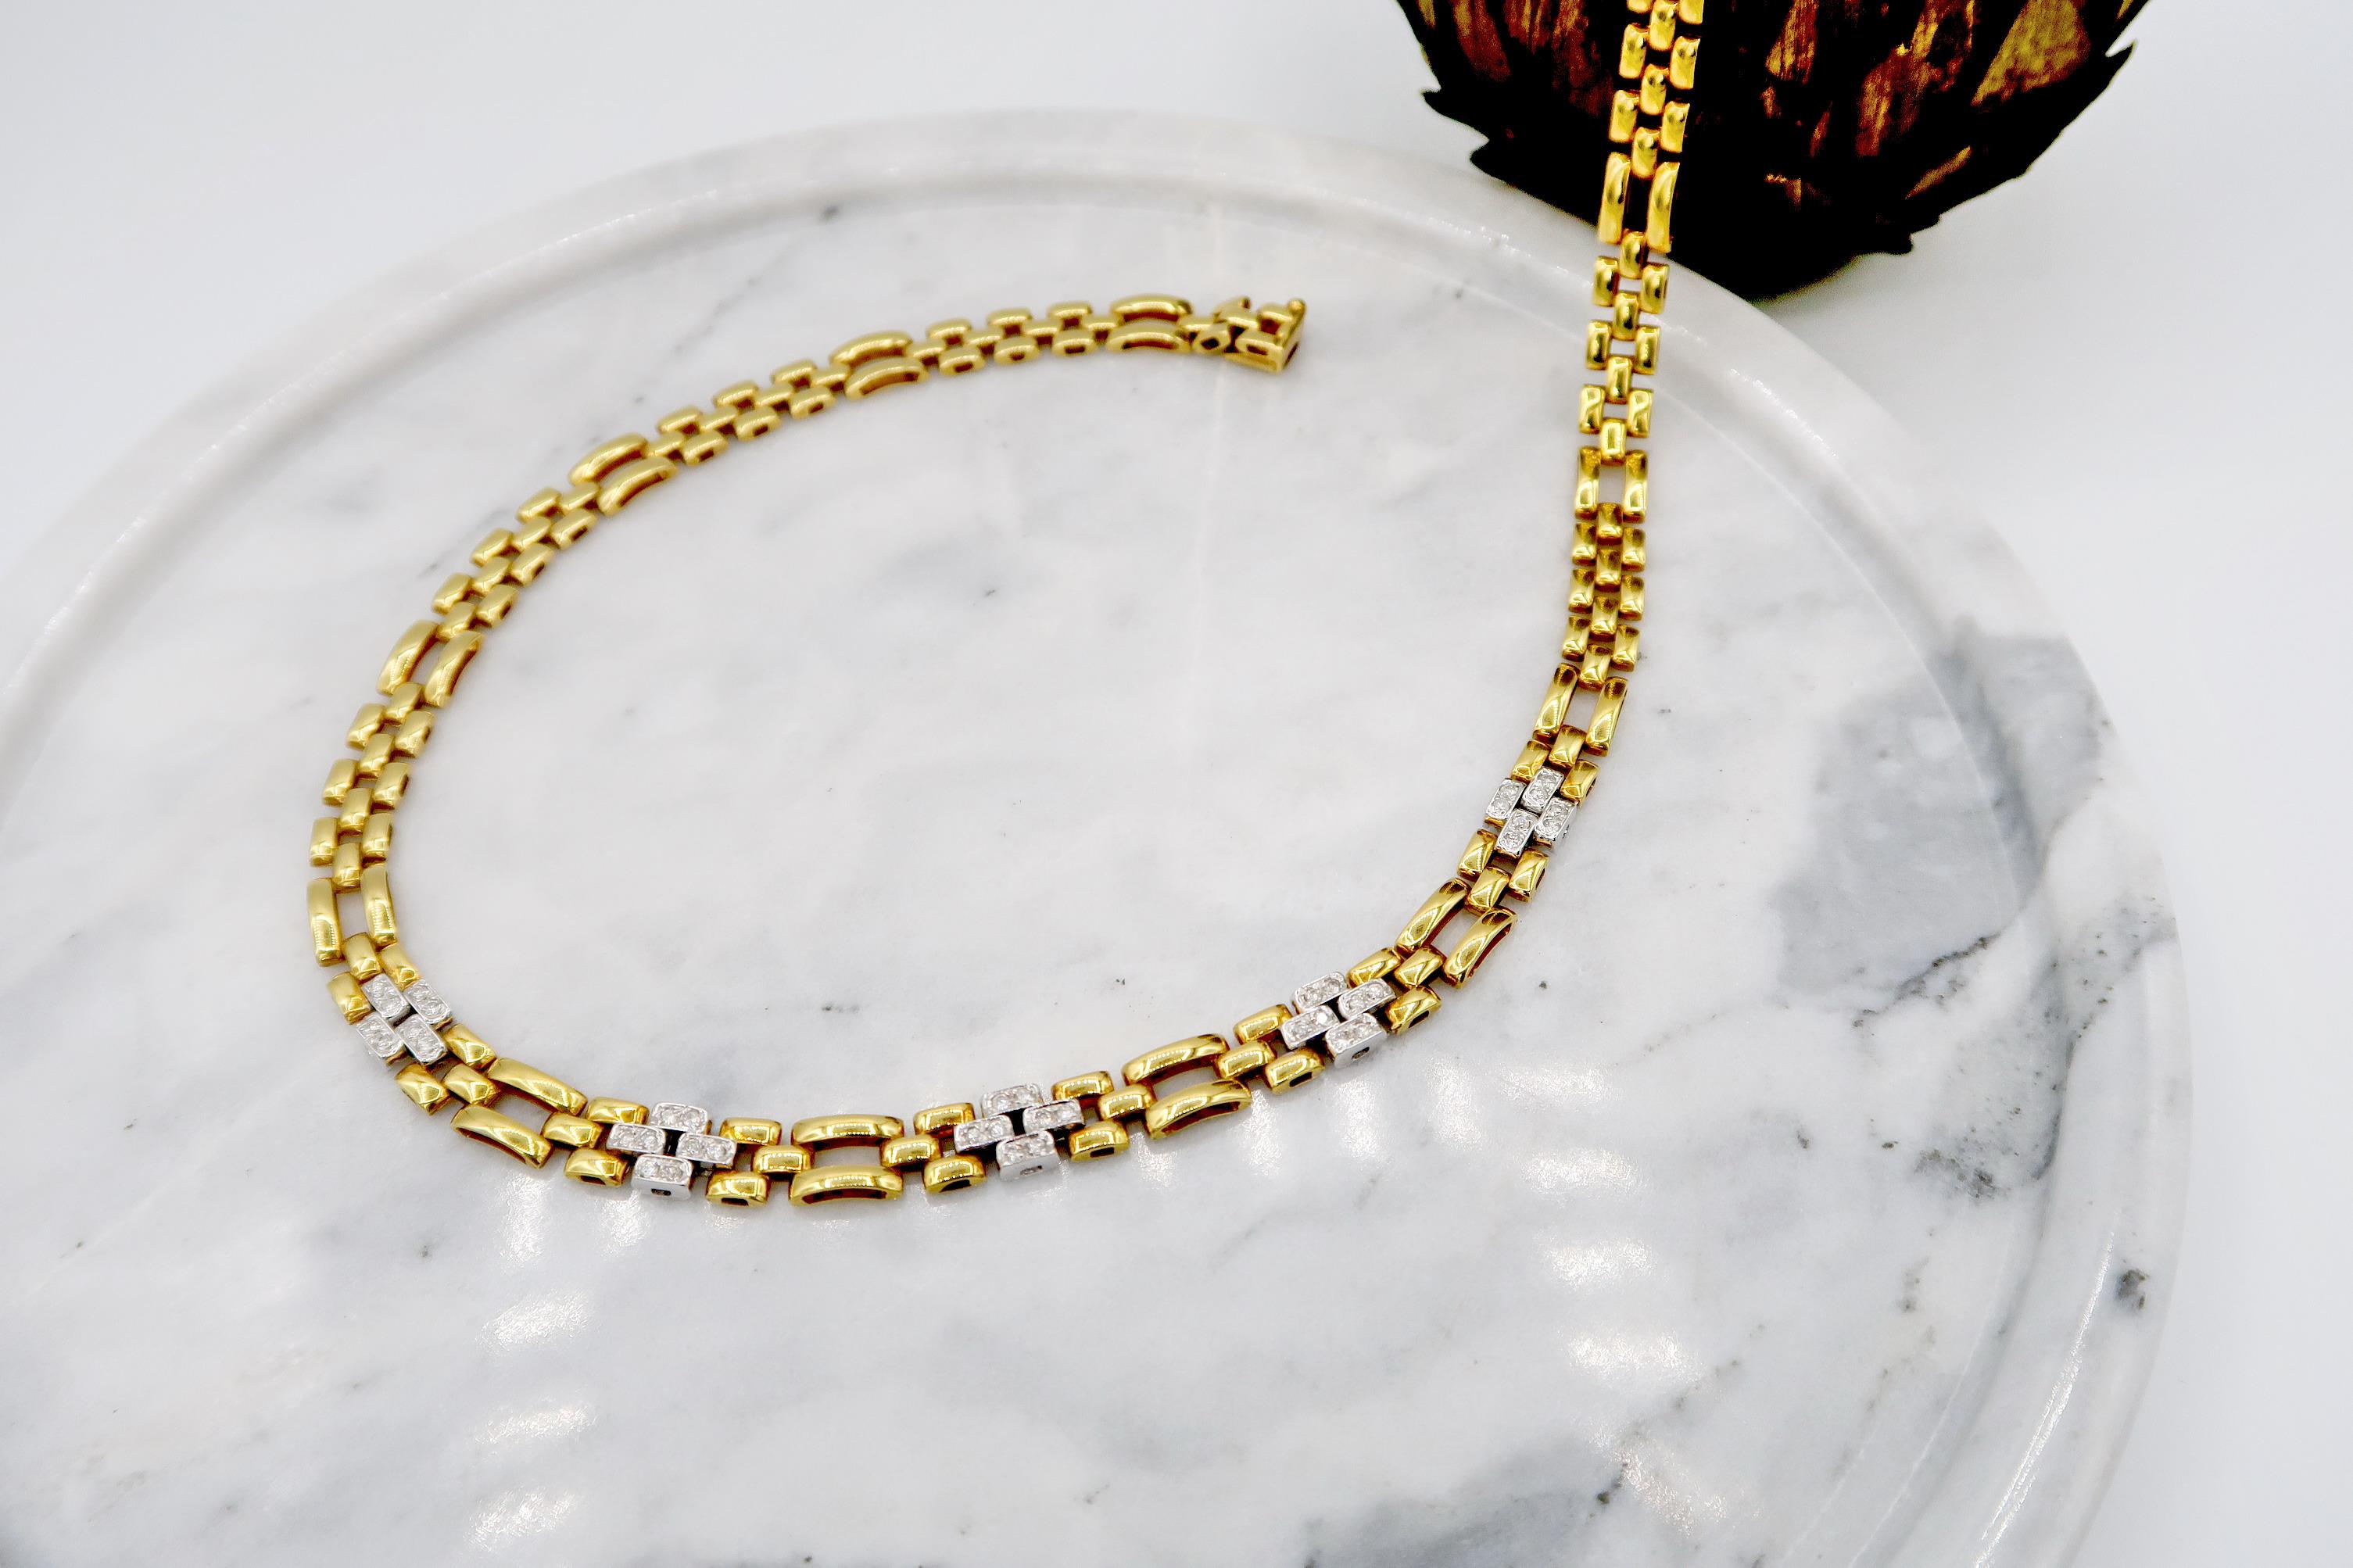 Alternating Diamond 18K Gold Panther Link Necklace

Length: 16 inches
Width: 7 mm

Diamond: 0.80 ct
Gold: 18K Gold, 42.337 g